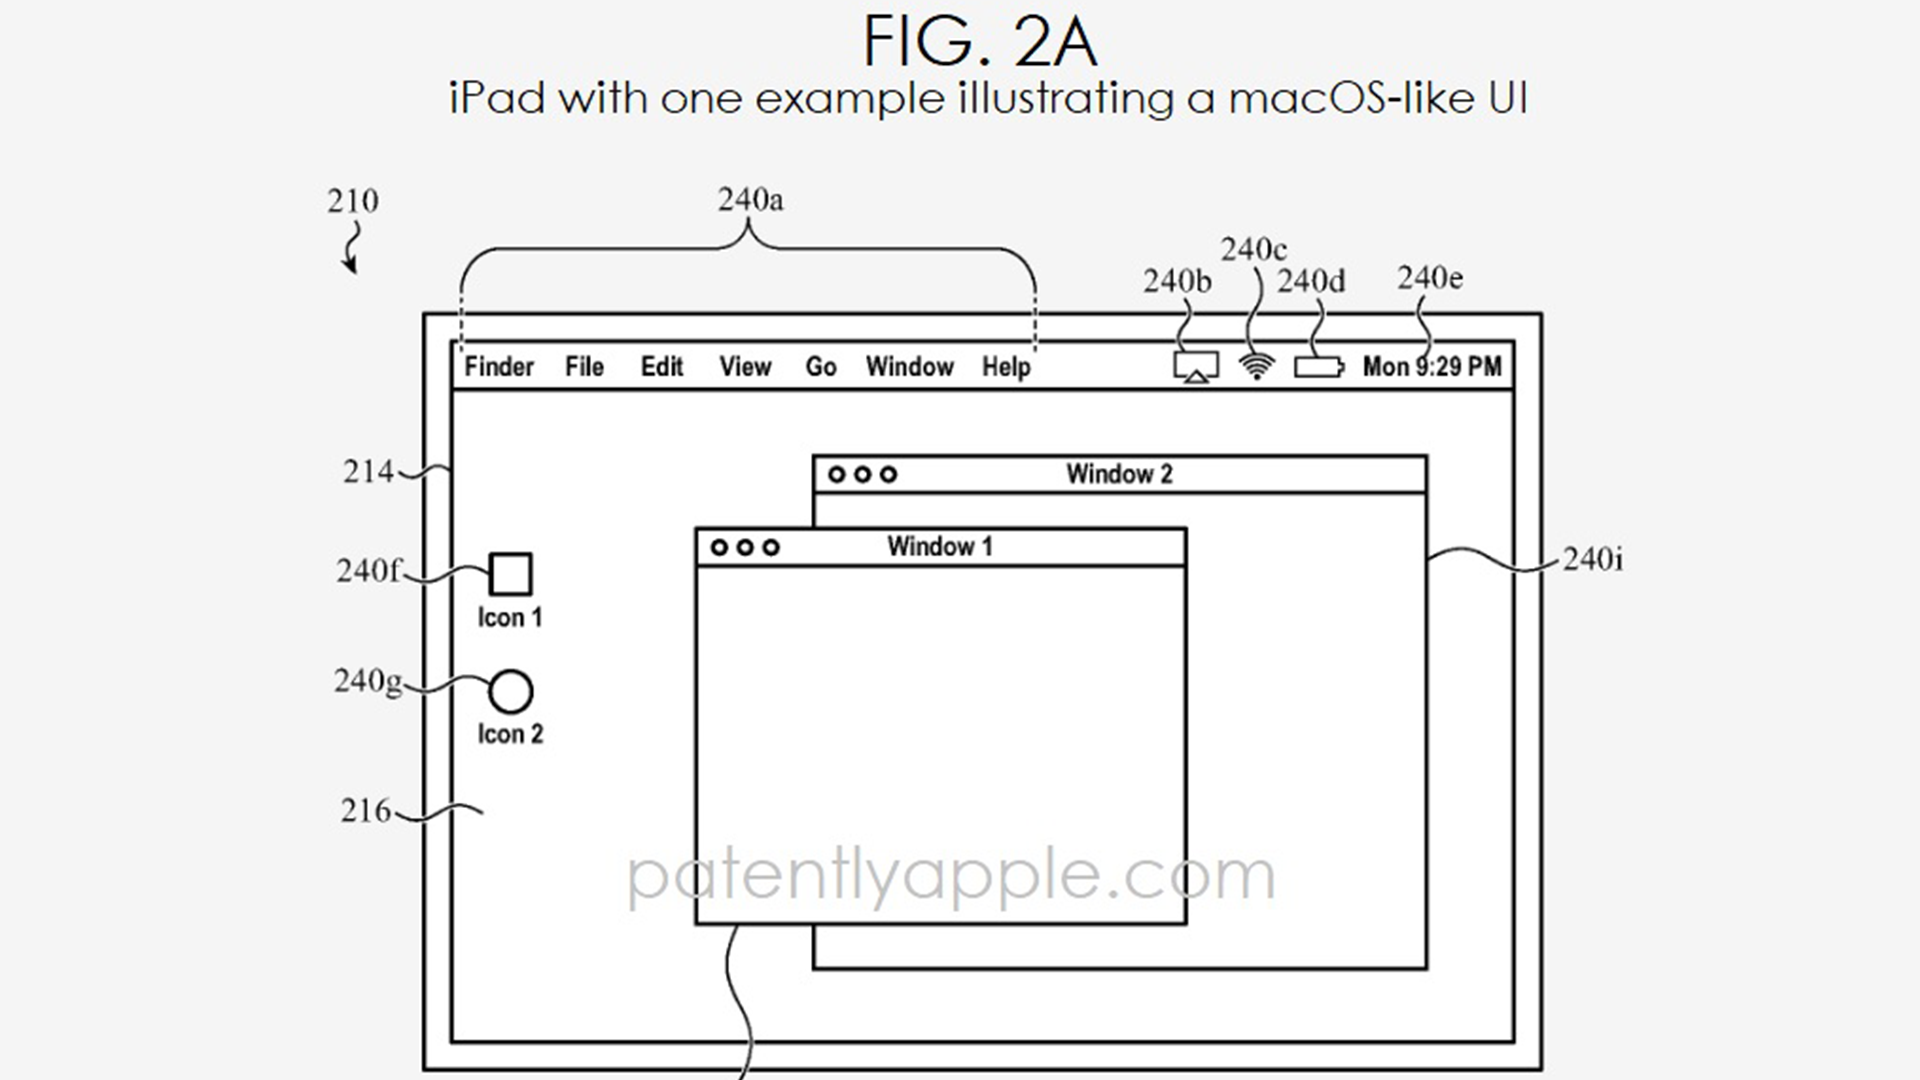 Patent presenting a macOS mode on iPad